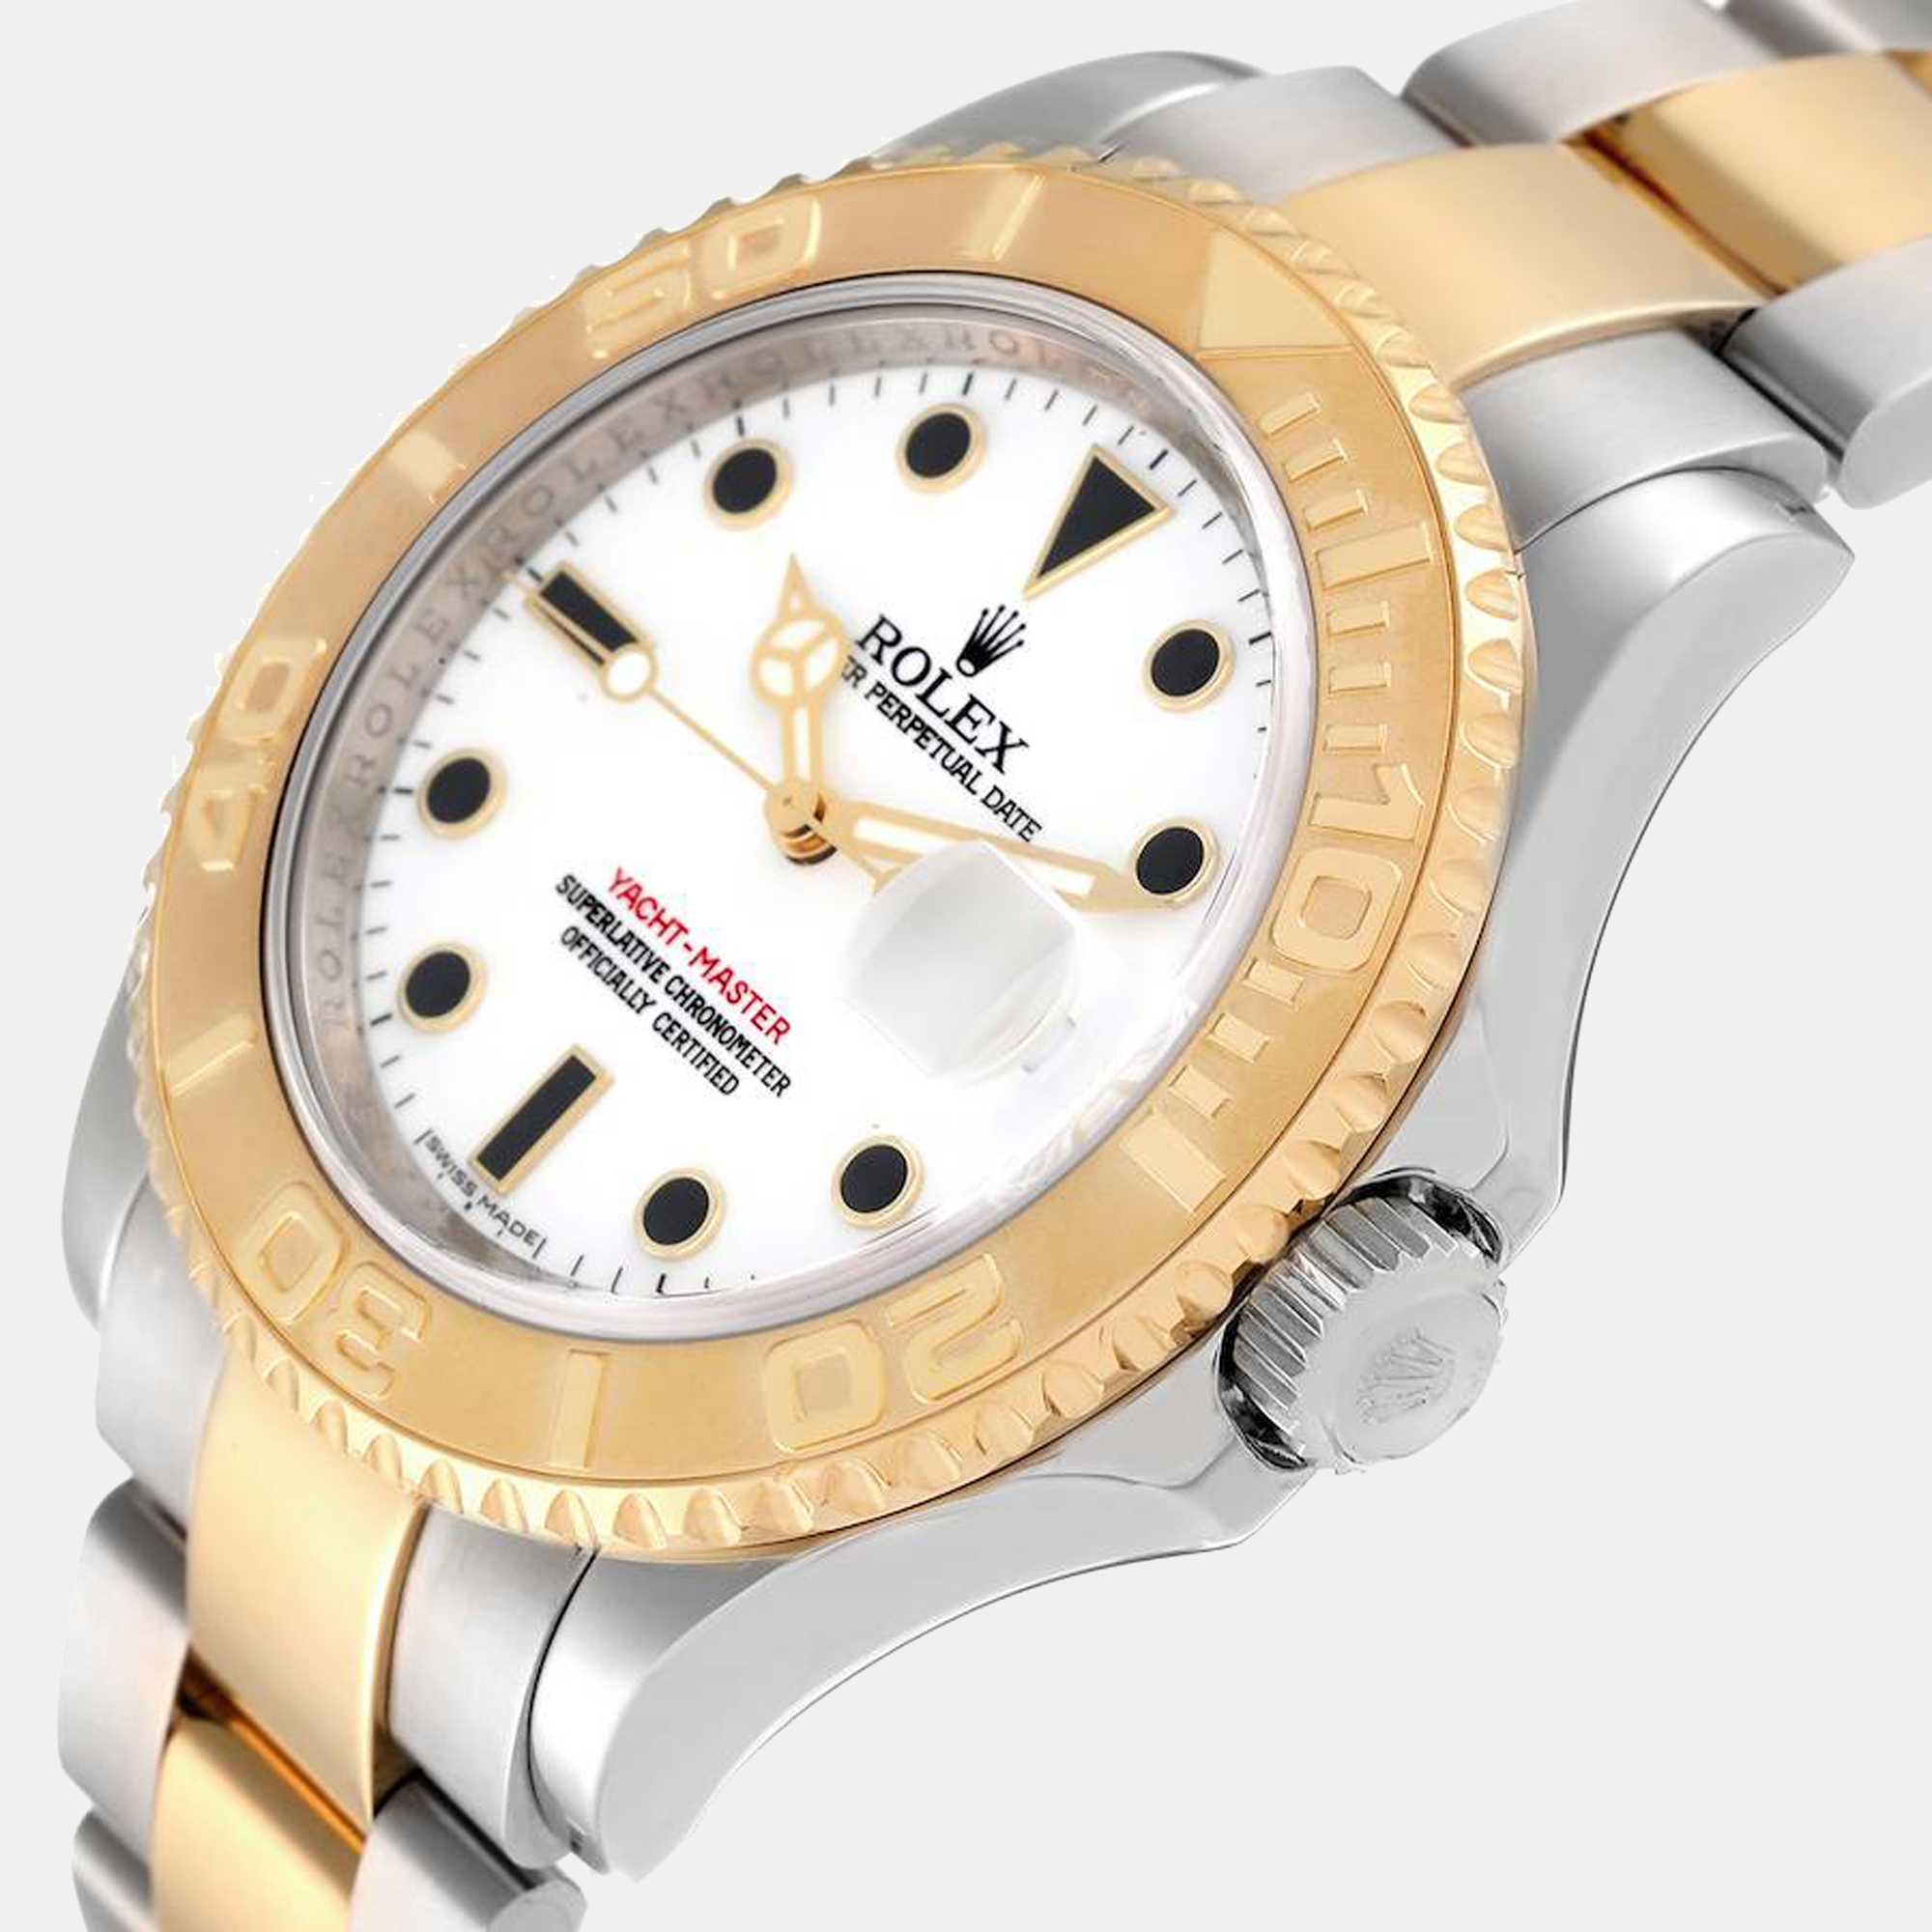 

Rolex White 18K Yellow Gold And Stainless Steel Yacht-Master 16623 Men's Wristwatch 40 mm